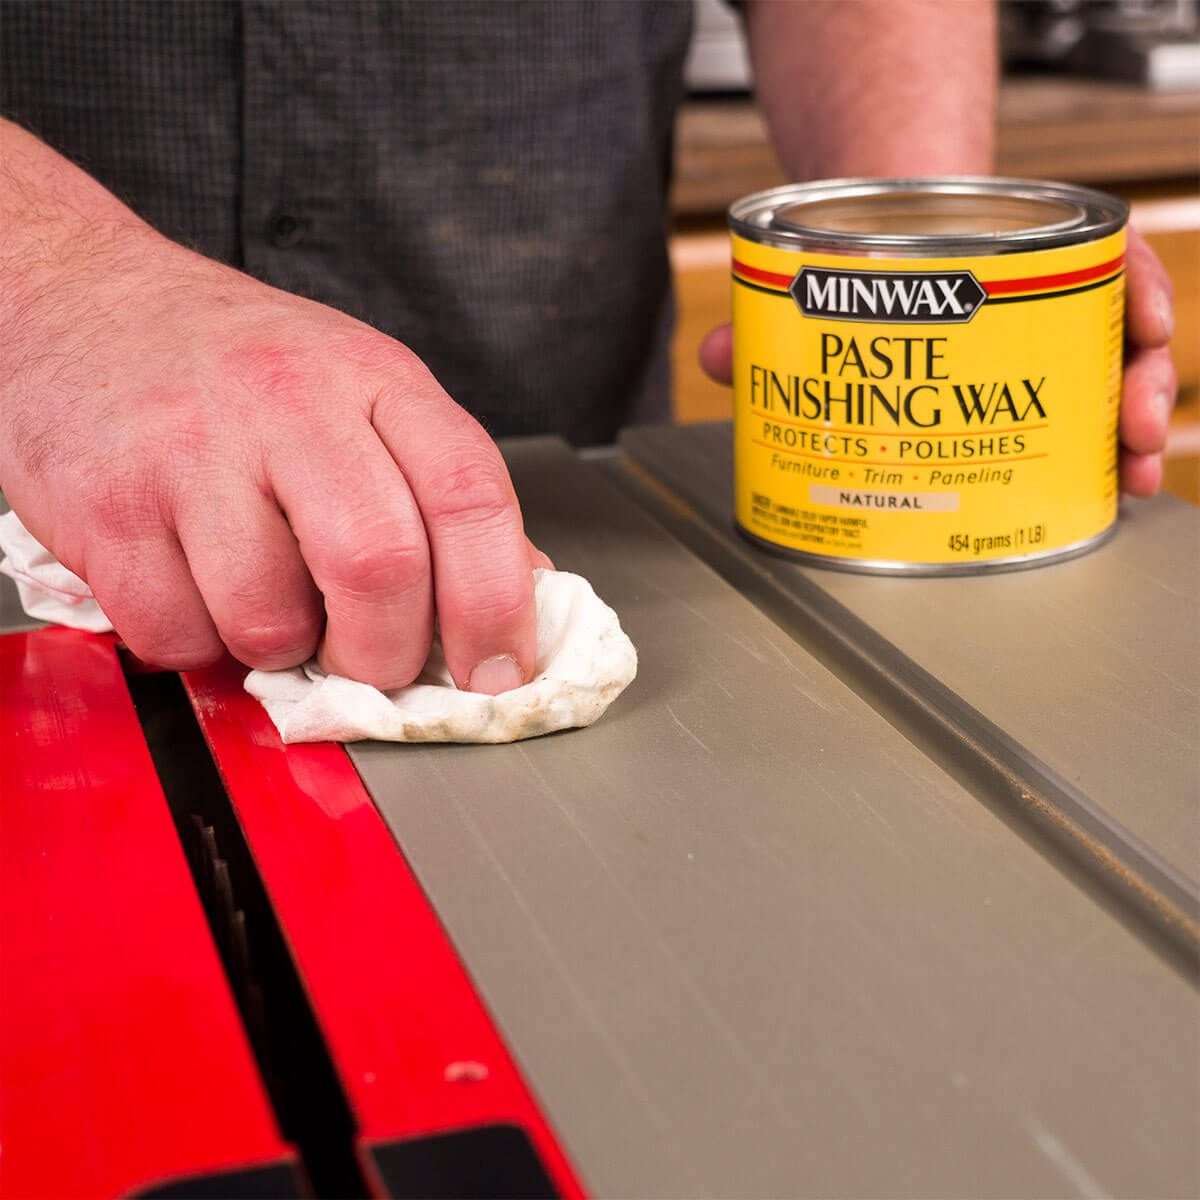 can you use minwax paste finishing wax on table saw?